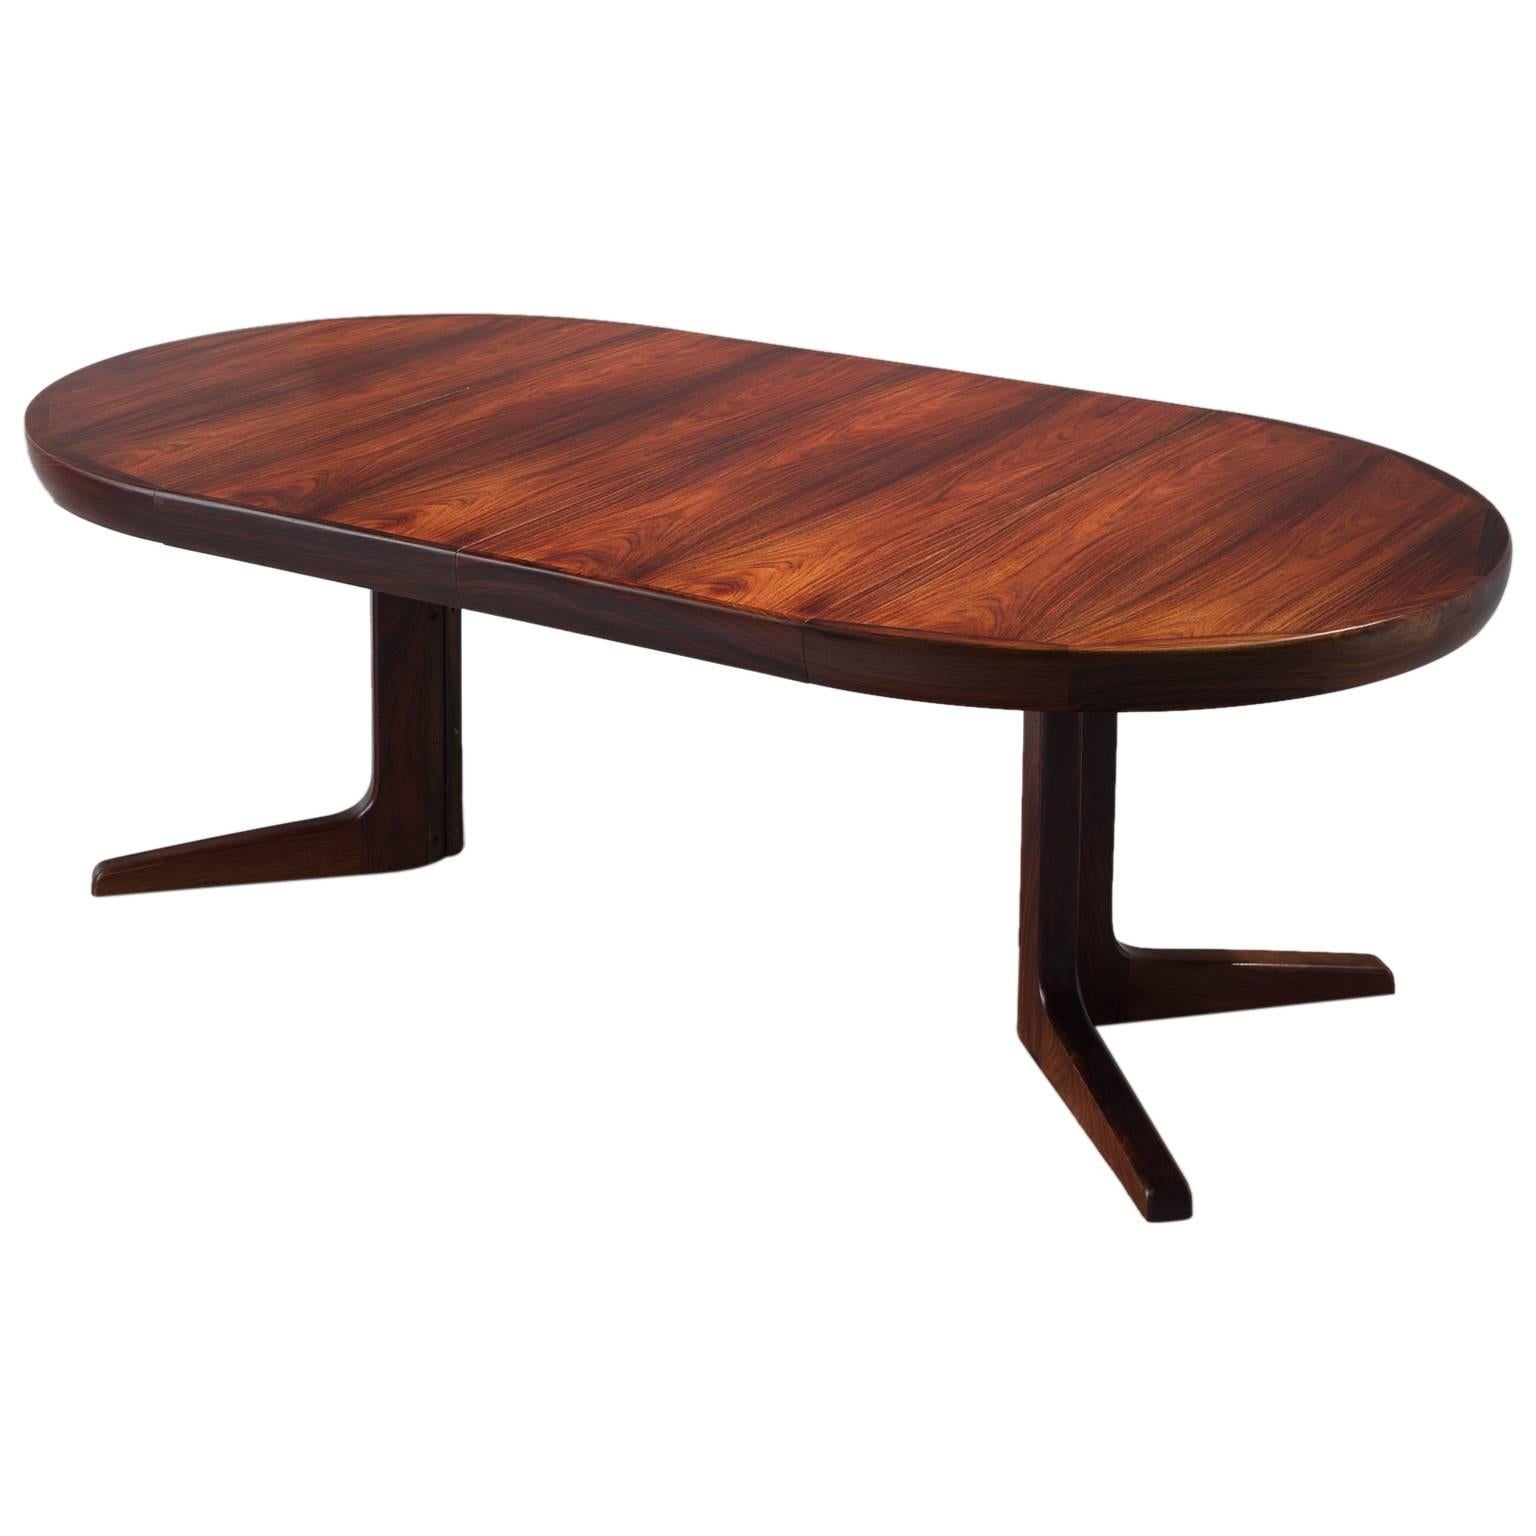 Extendable Danish Dining Table with a Rich Rosewood Grain